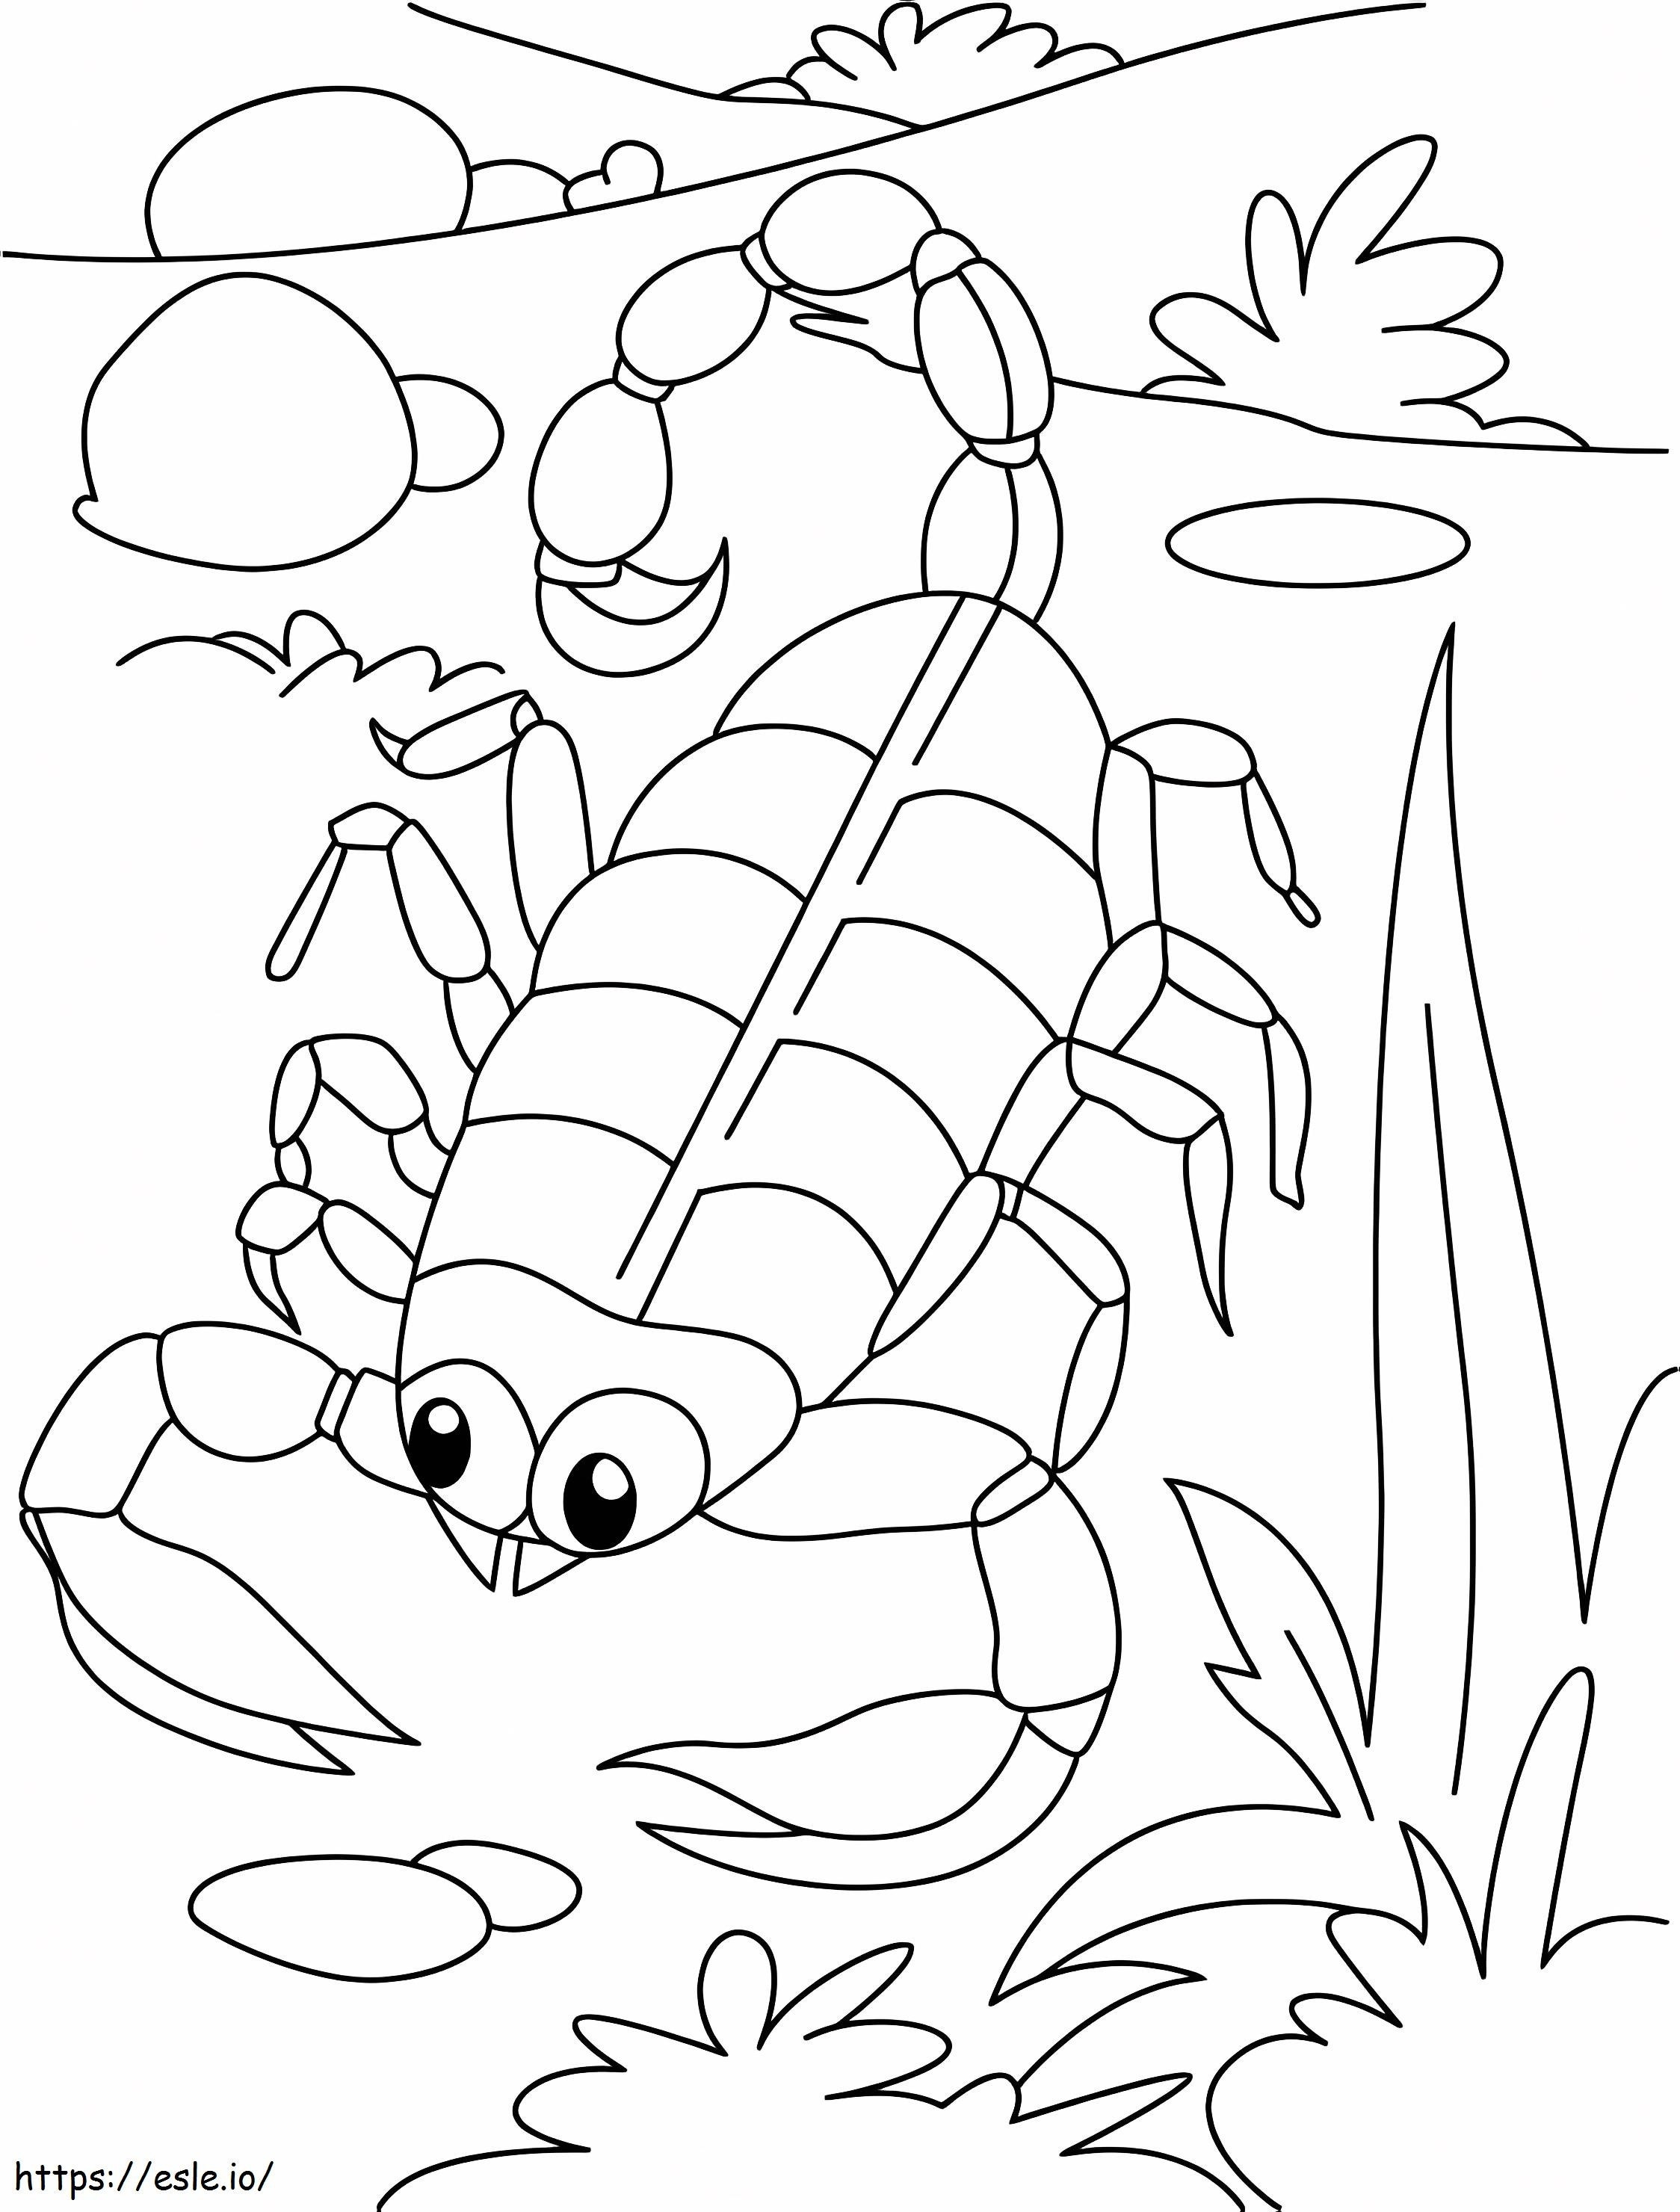 Adorable Scorpion coloring page